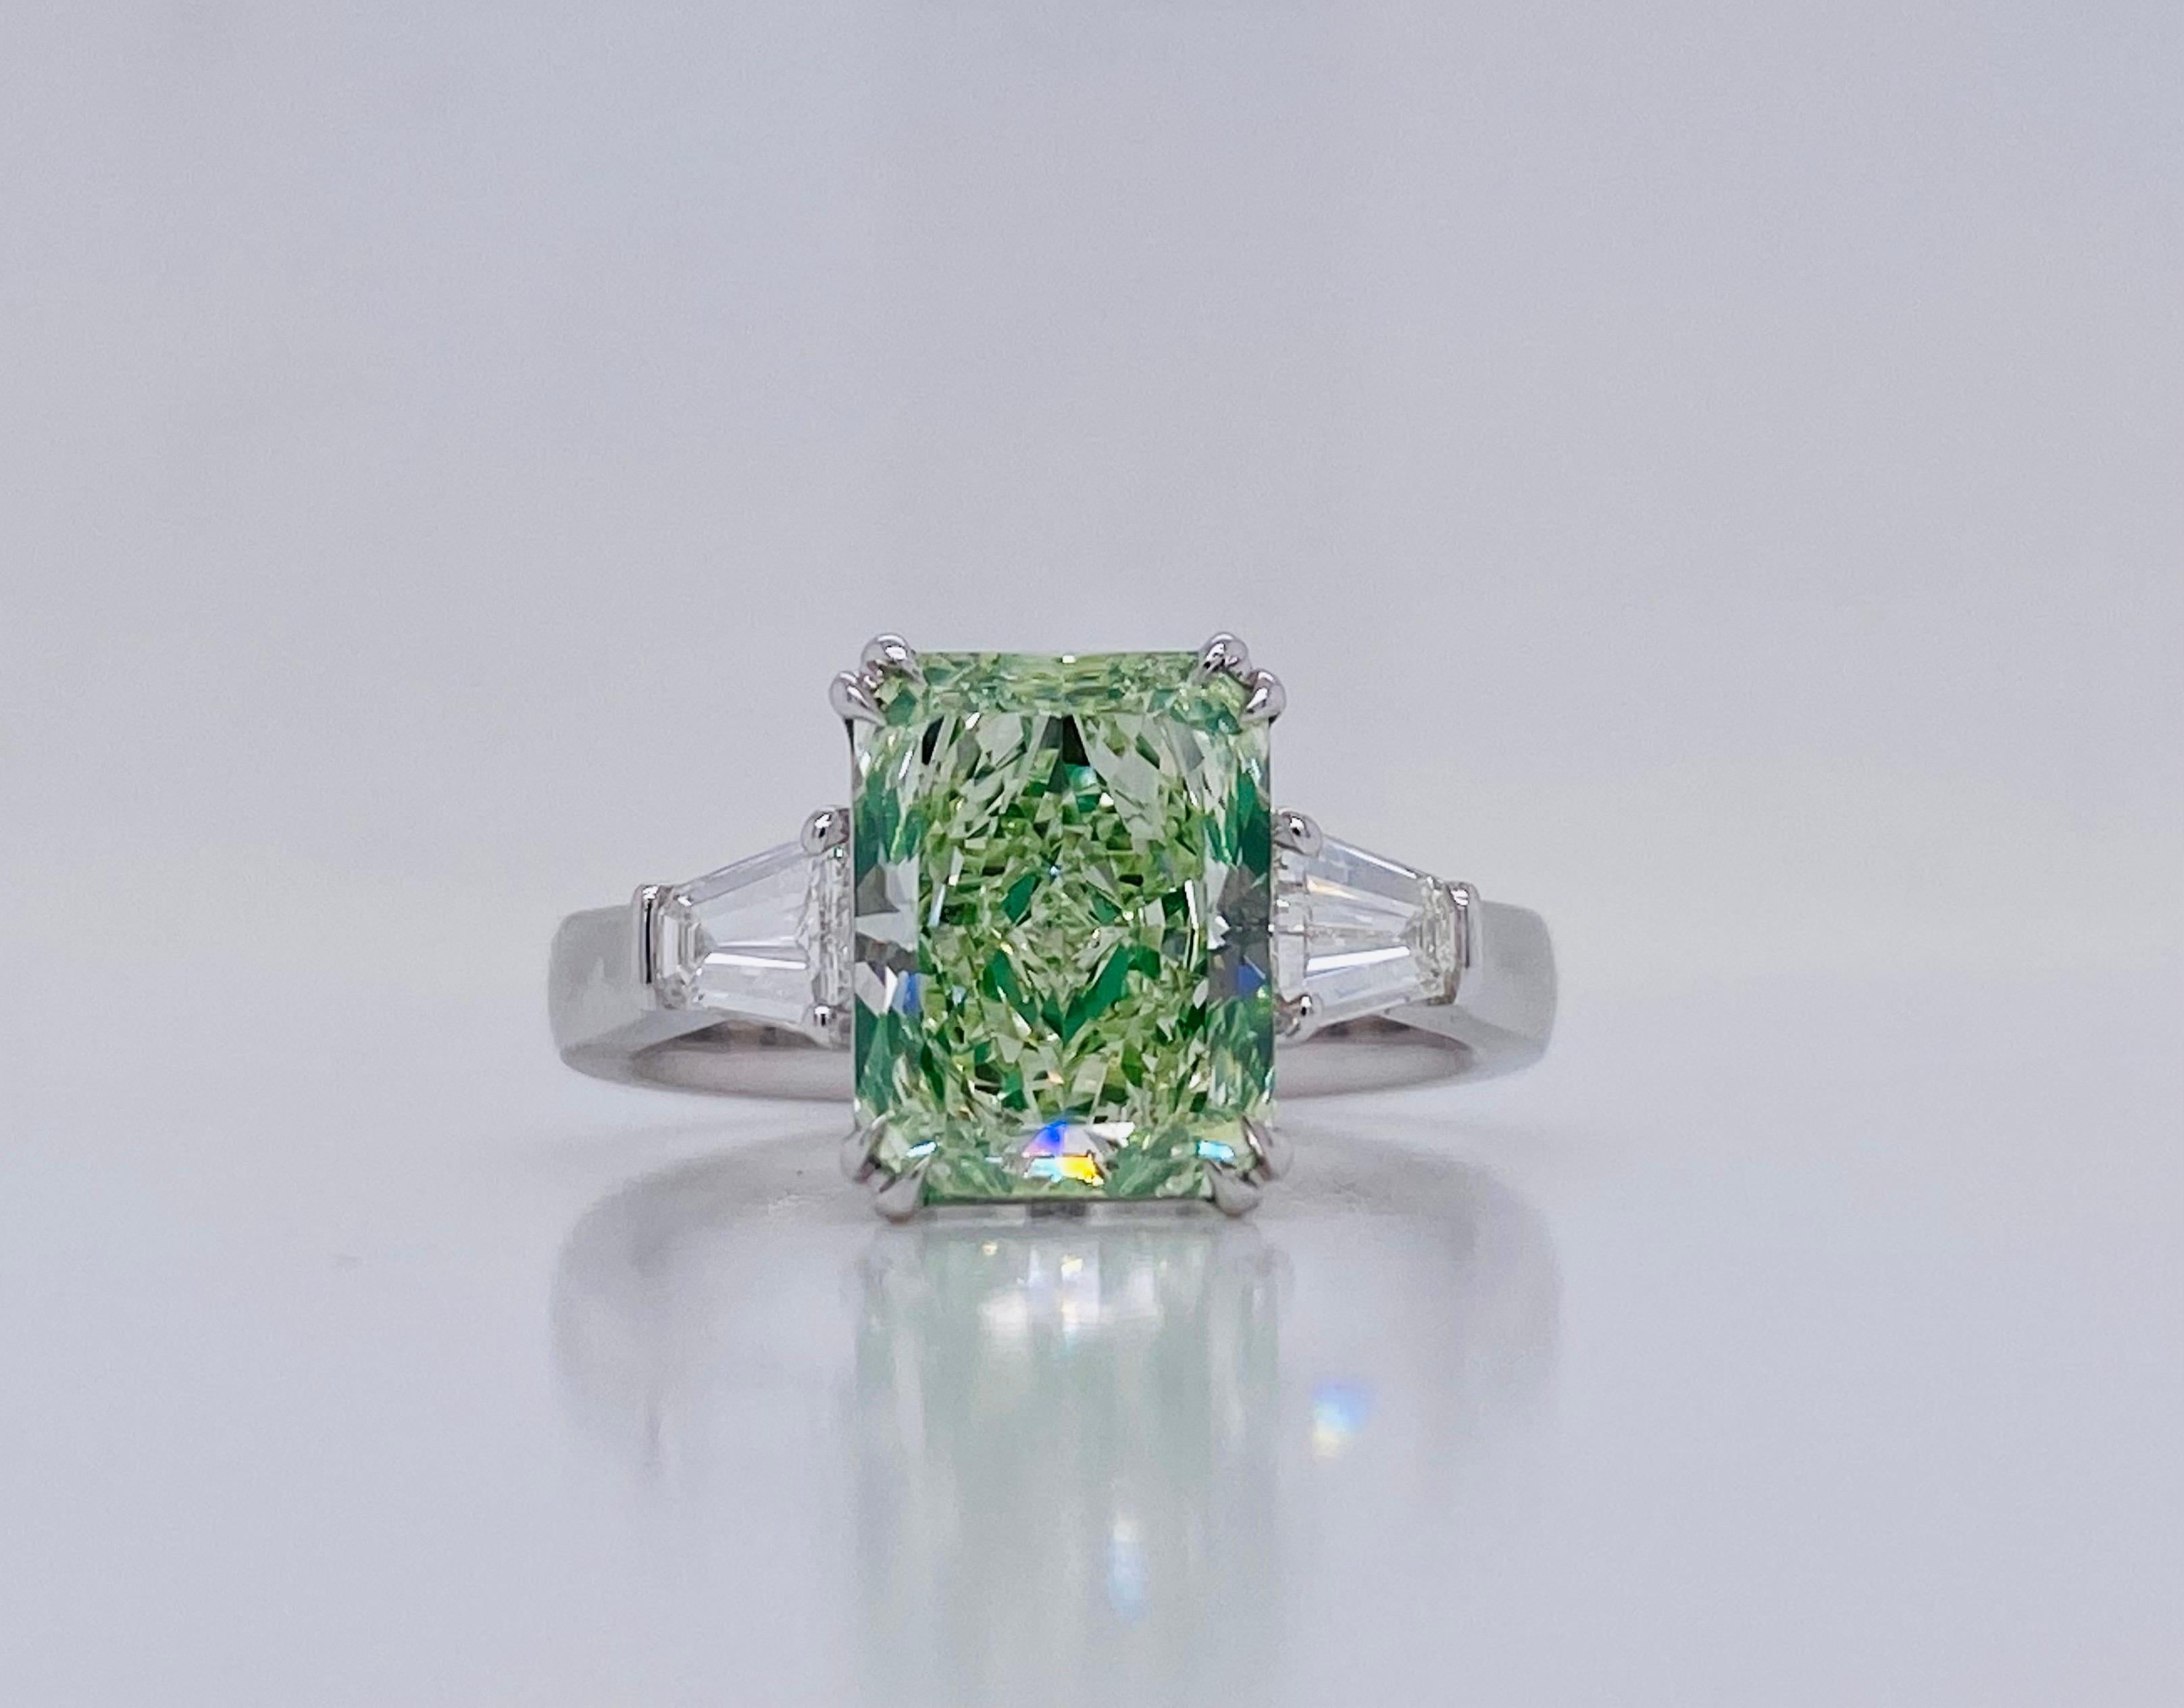 From the museum vault at Emilio Jewelry New York,
Another masterpiece from our natural fancy green diamond collection. There are very few jewelers who really know how to bring out the color of such diamonds. Please inquire for certificate, diamonds